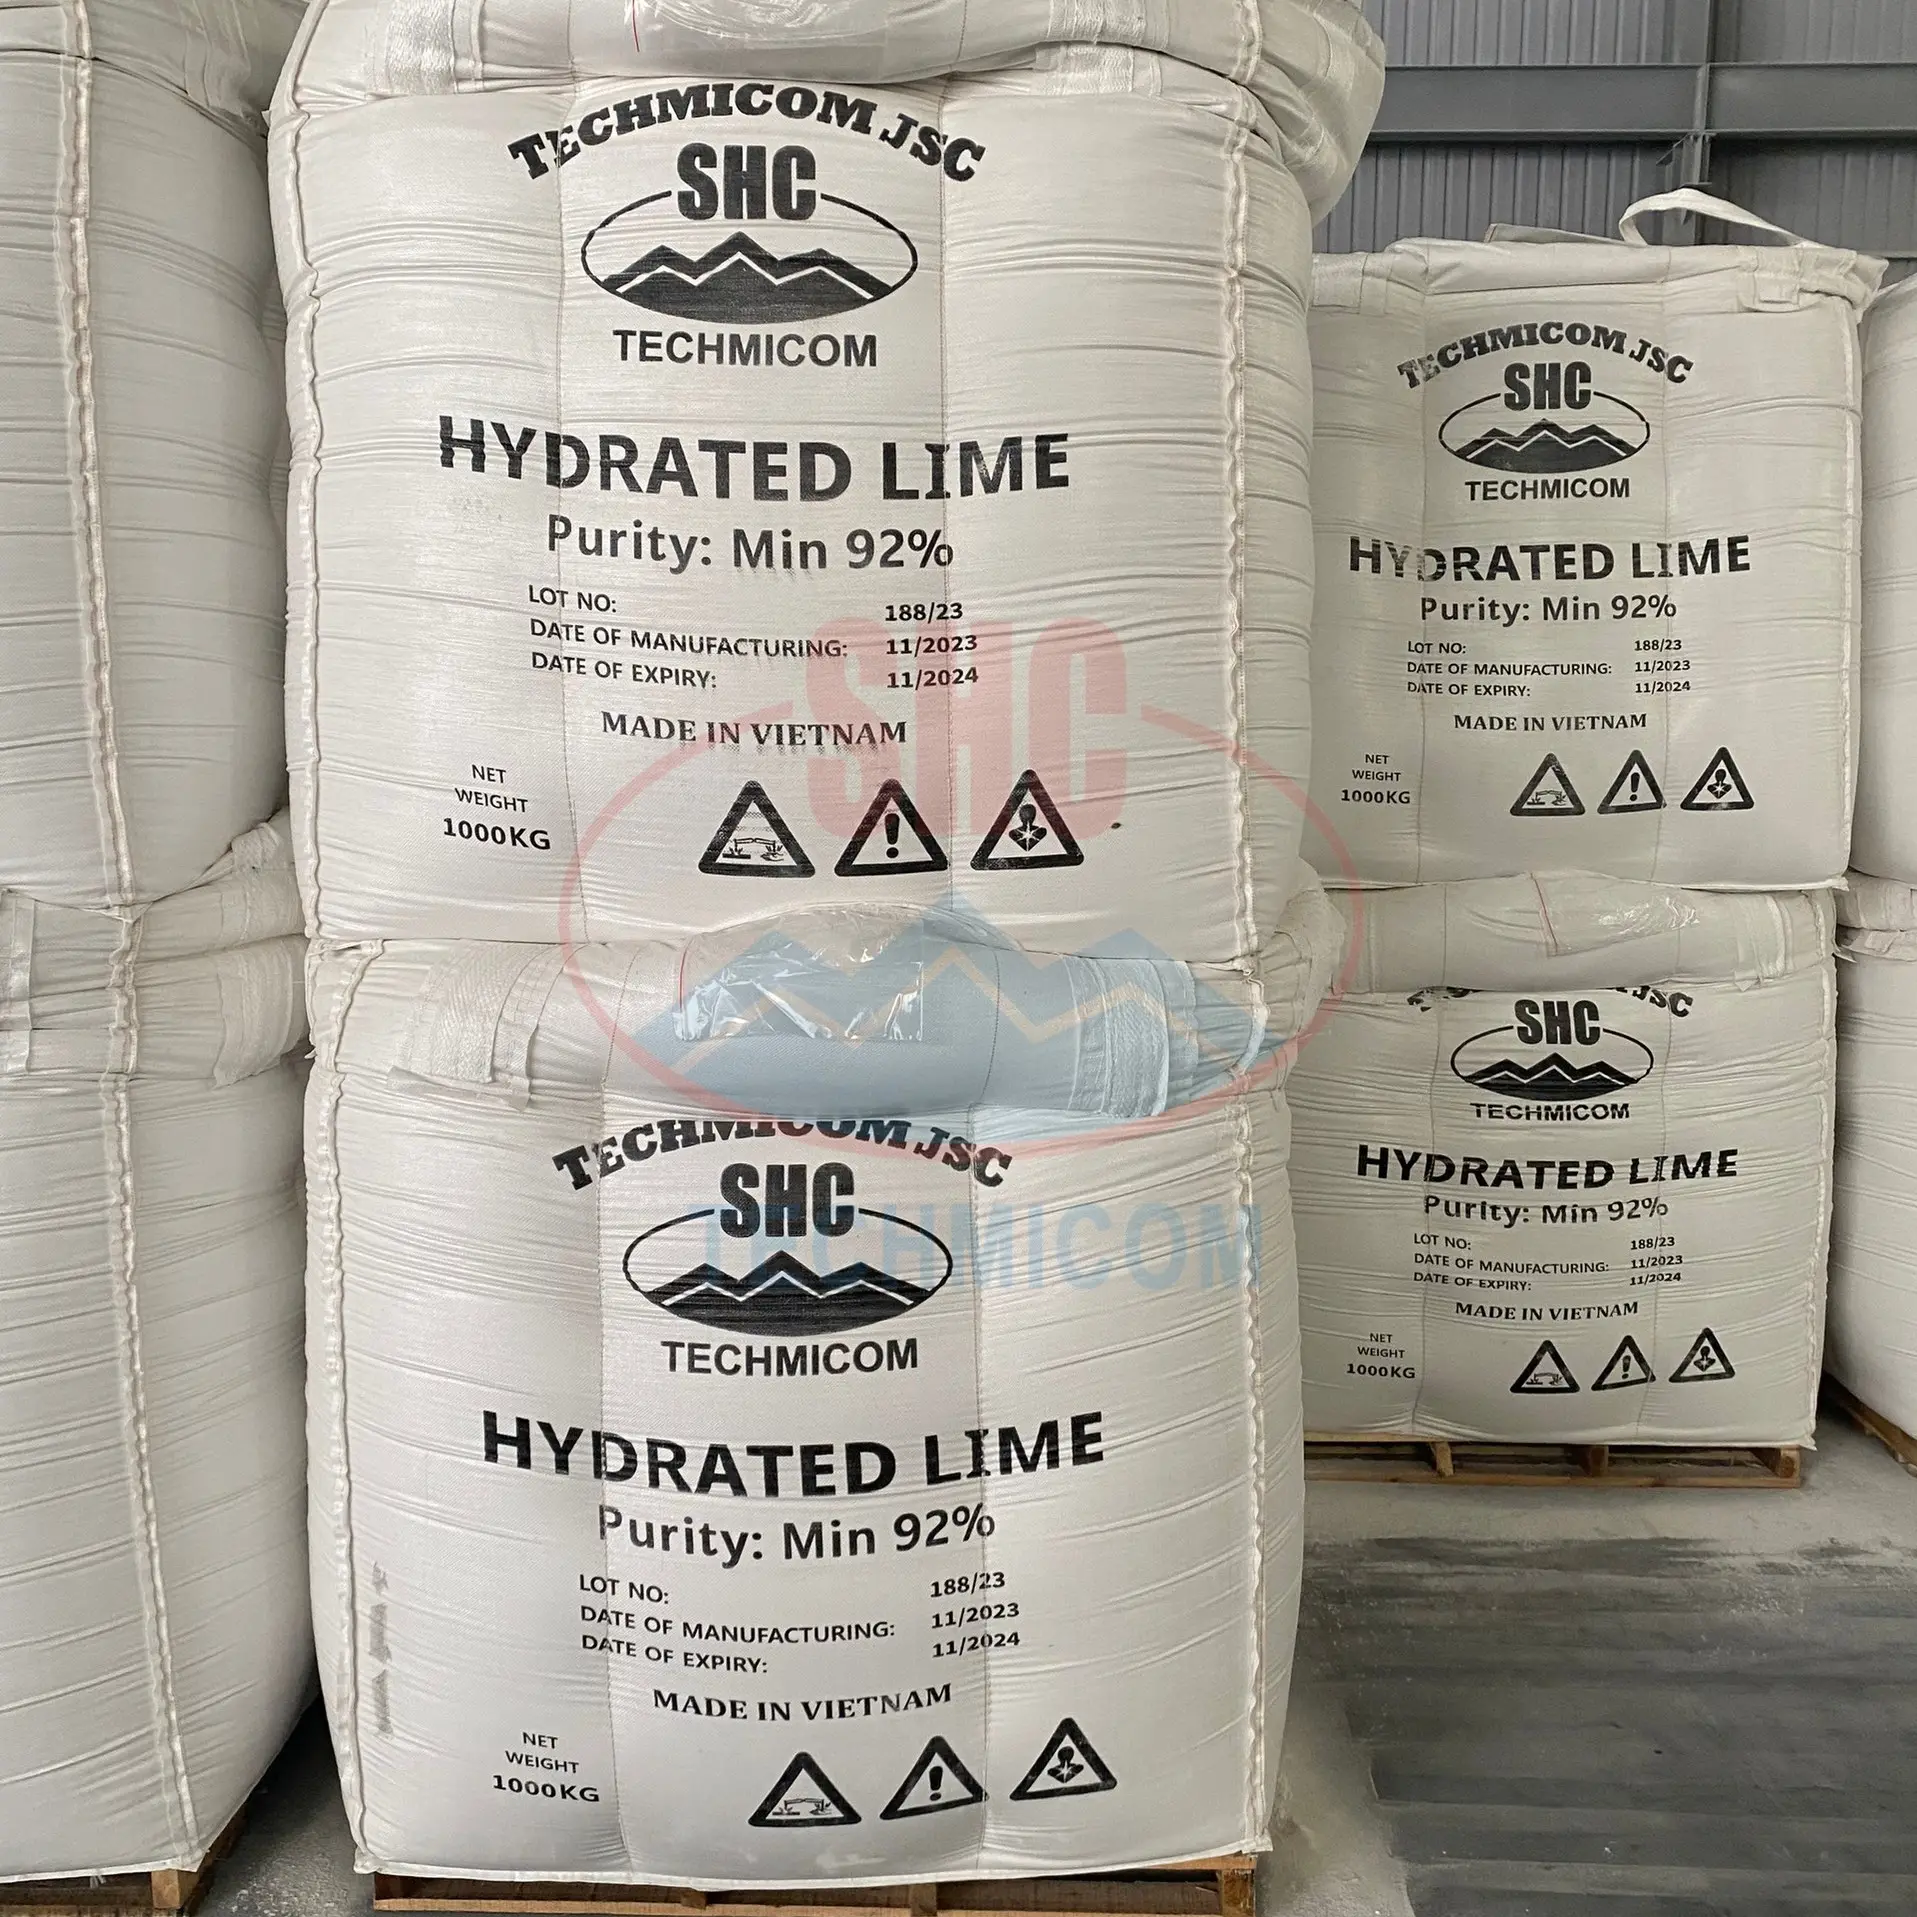 FACTORY DIRECT SUPPLY OF PREMIUM QUALITY HYDRATED LIME POWDER FROM VIETNAM CHEAP WHOLESALE PRICES FOR FLUE GAS TREATMENT PROCESS